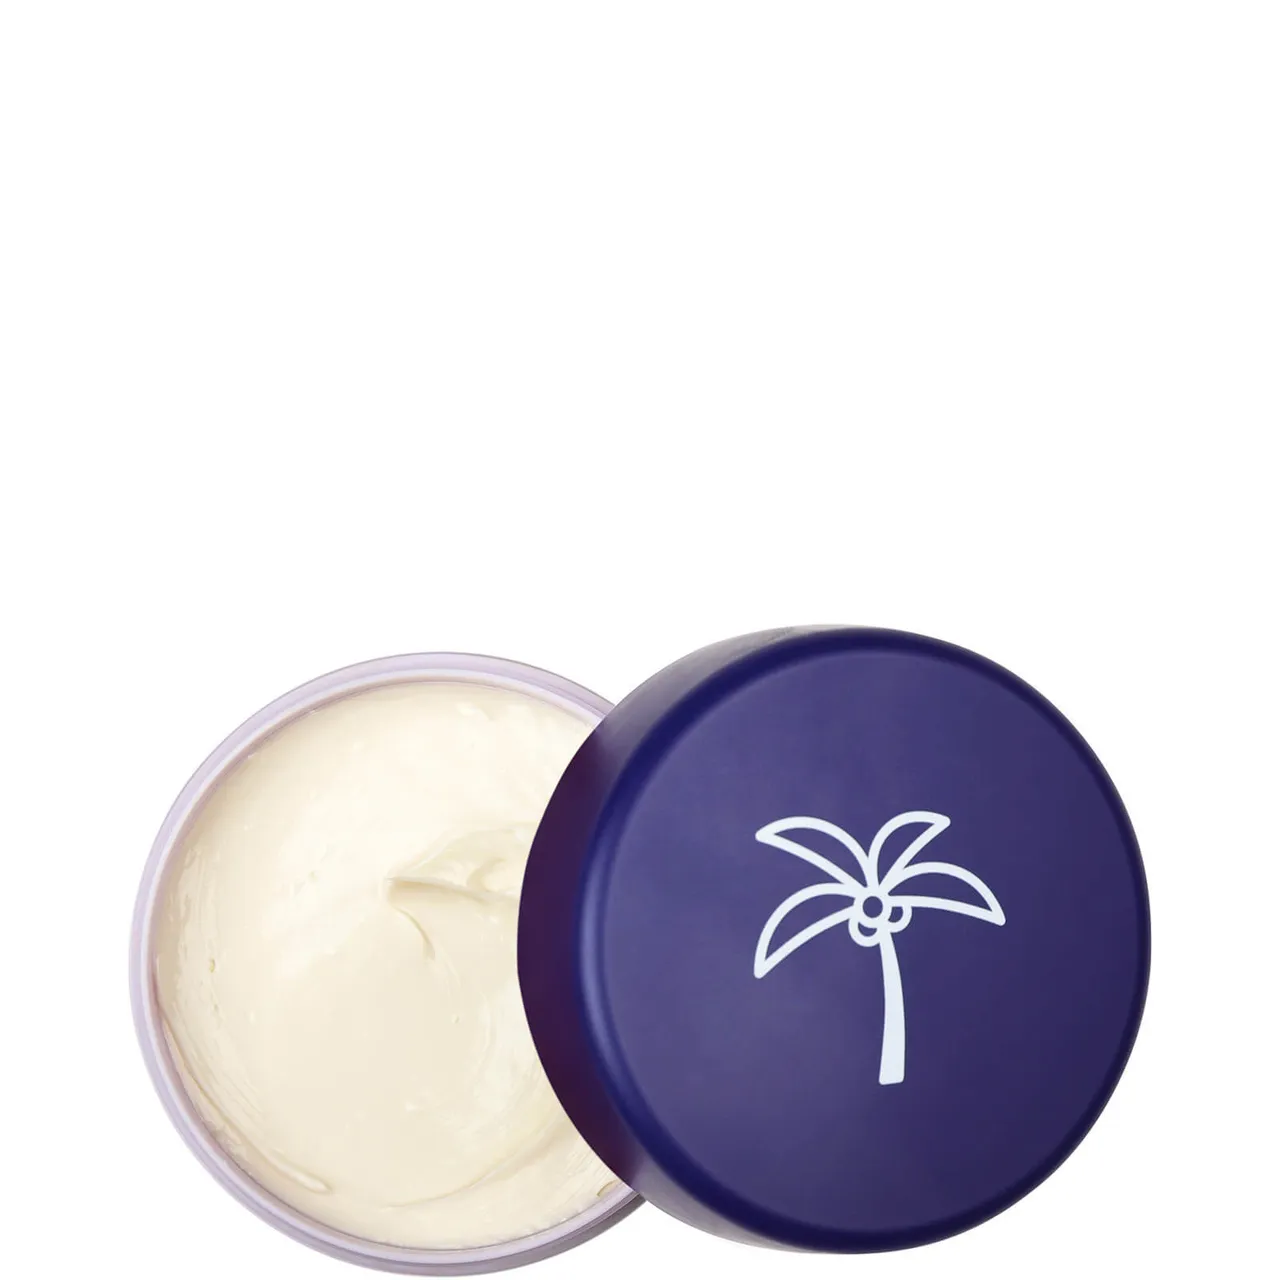 Coco & Eve Glow Figure Whipped Body Cream Lychee and Dragon Fruit Scent - (Various Sizes) - 212ml